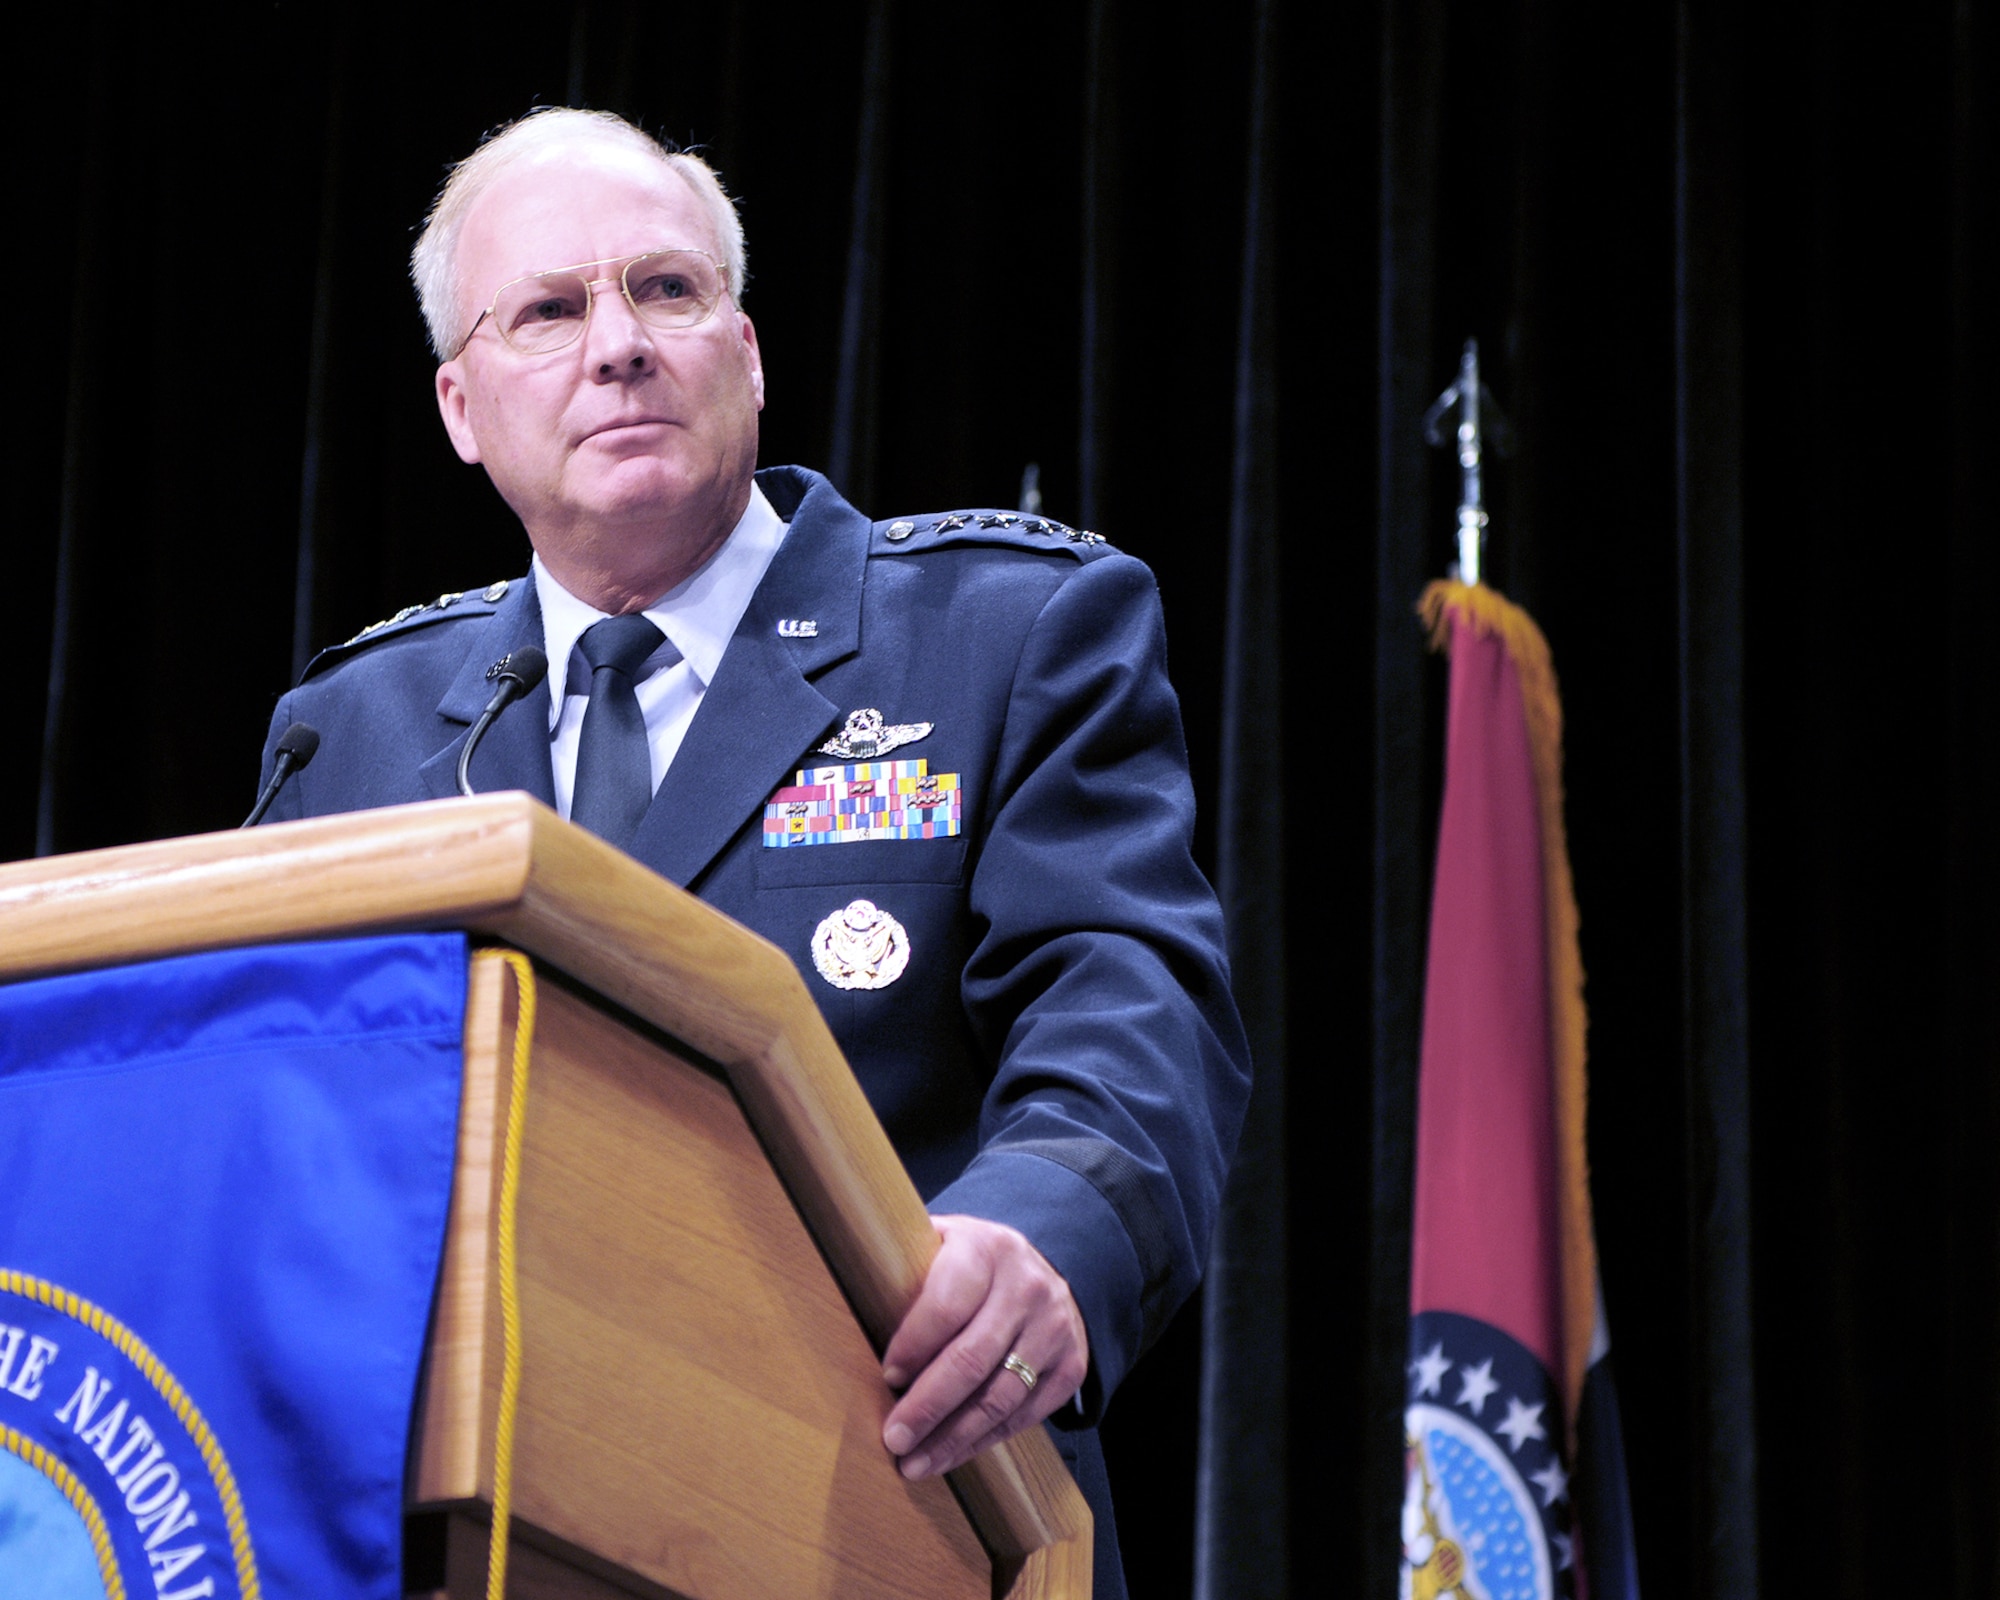 Gen. Craig McKinley, the chief of the National Guard Bureau, tells Guard members attending the 39th Annual Conference of the Enlisted Association of the National Guard of the United States in St. Louis Aug. 8, 2010, that the National Guard likely will continue to play a significant role in overseas contingency operations for the foreseeable future. (U.S. Army photo/Staff Sgt. Jim Greenhill)